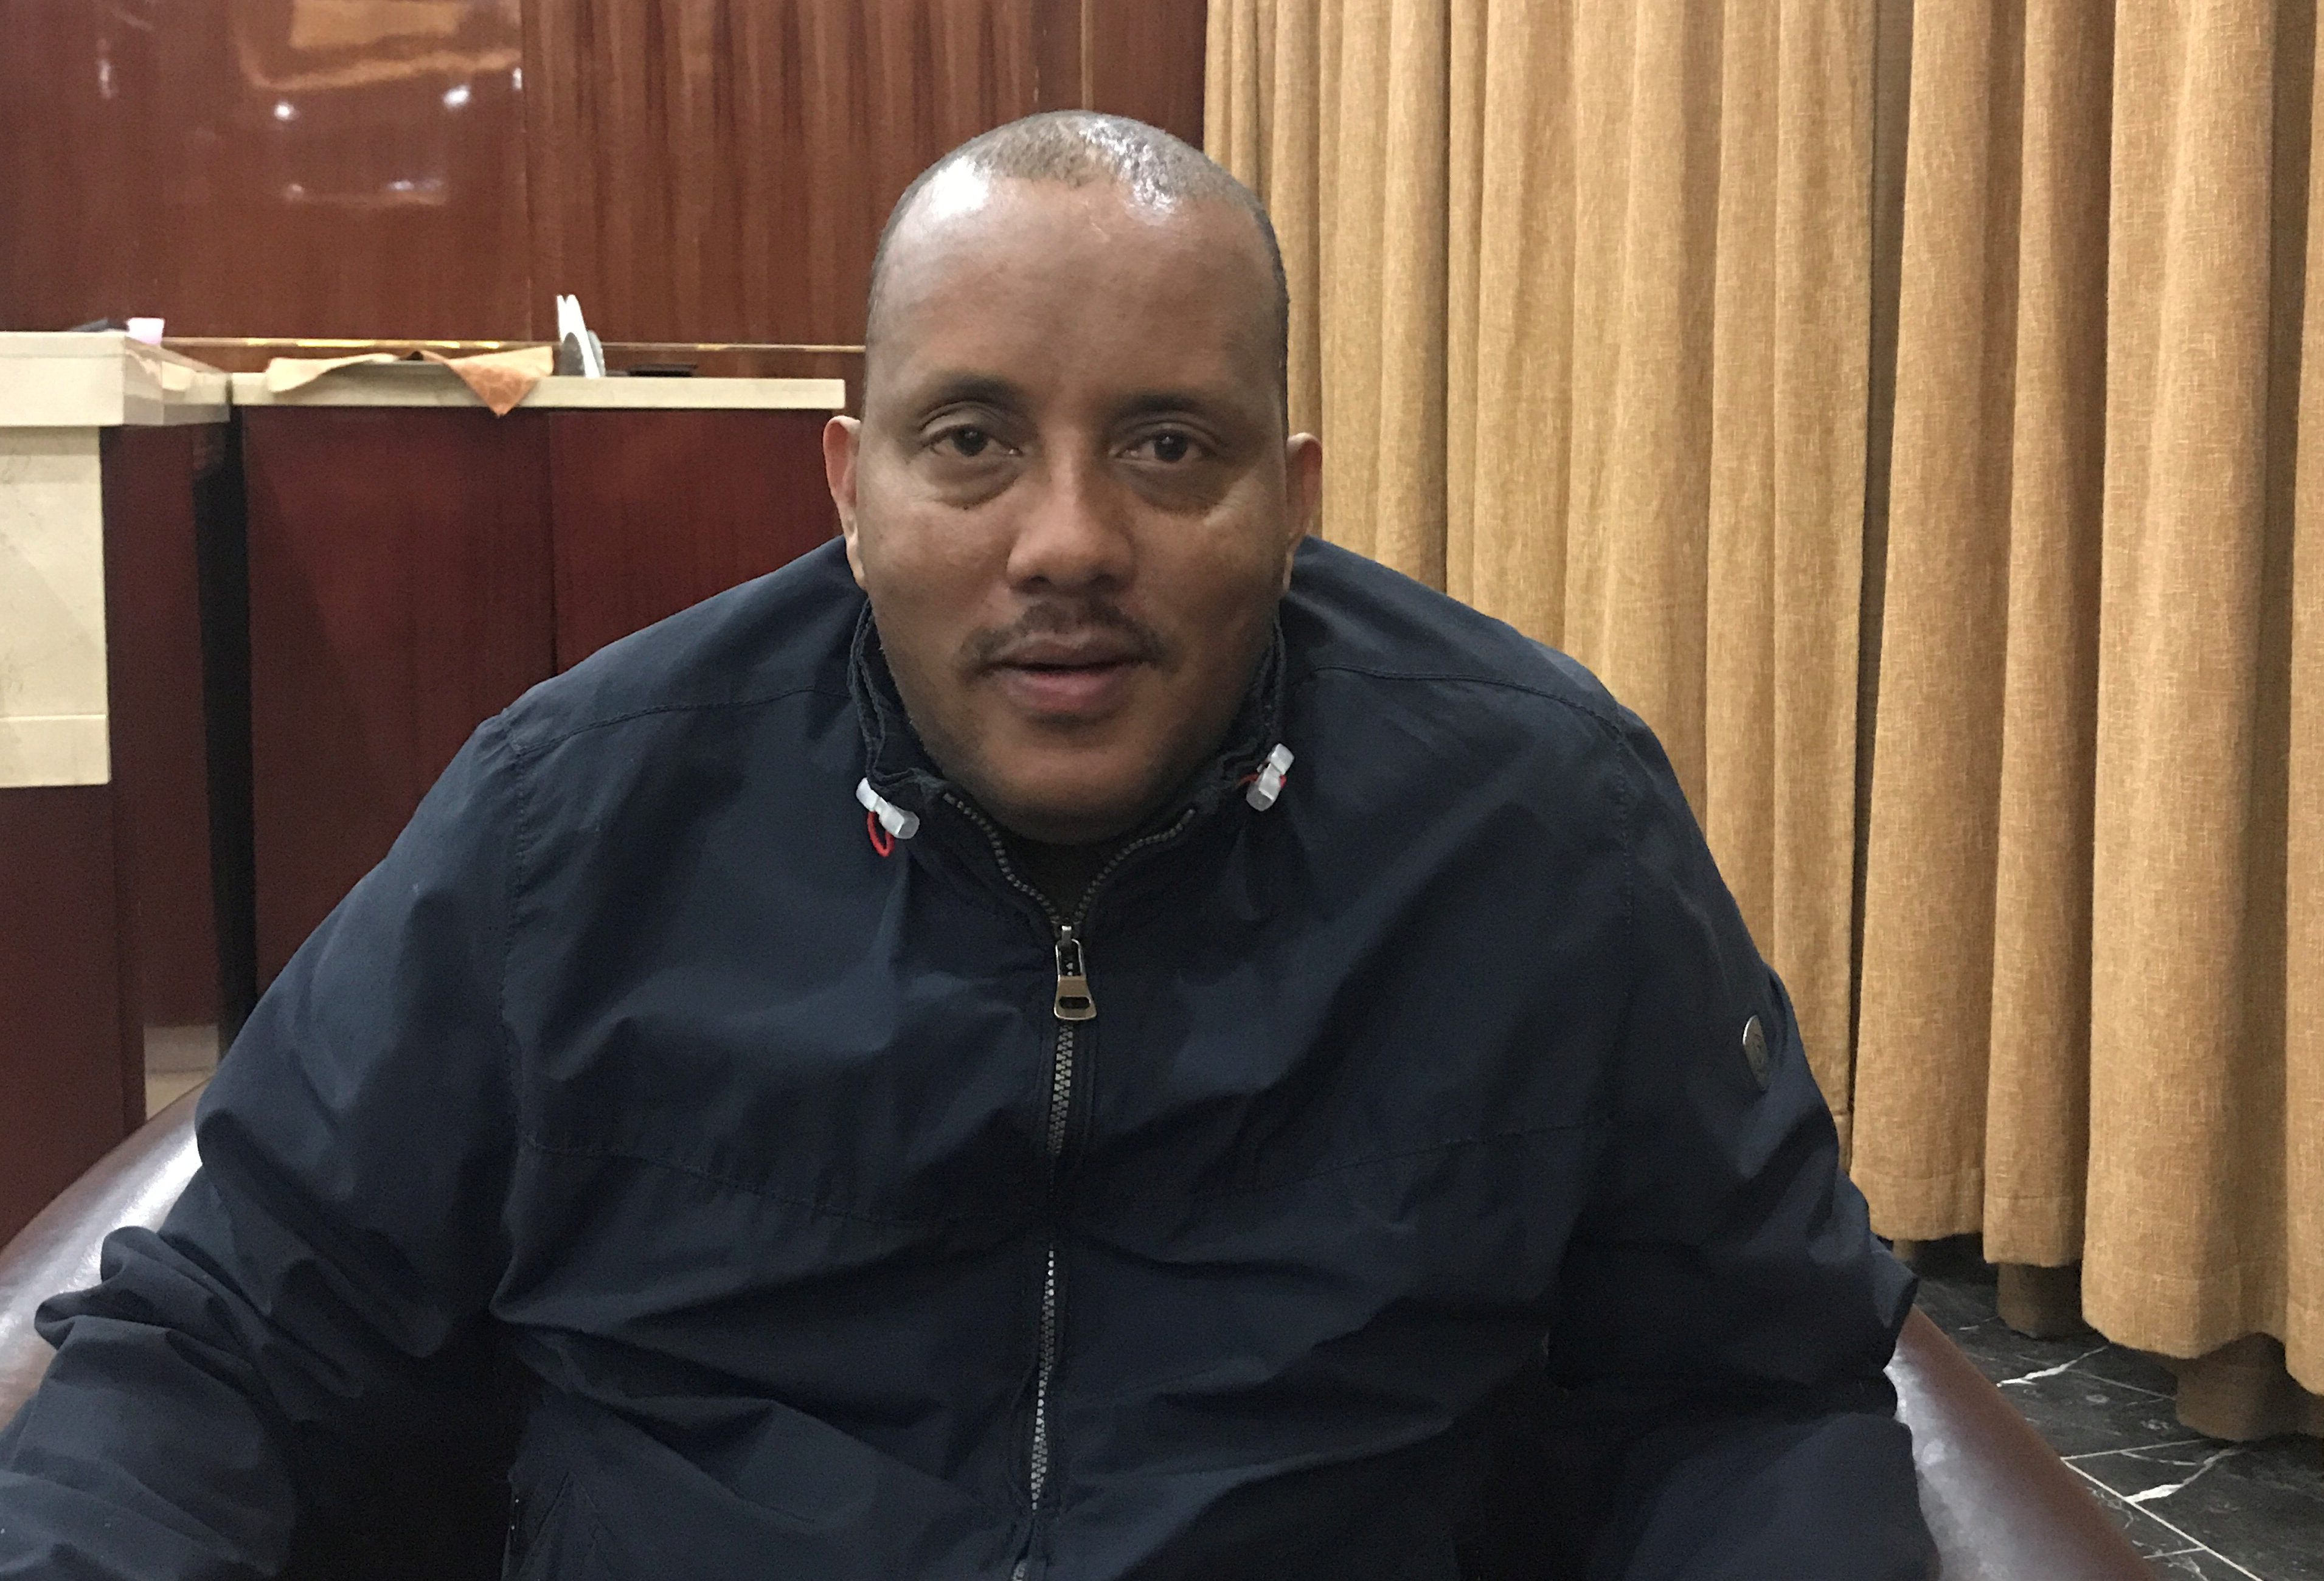 Getachew Reda, a senior politician from the Tigrayan ethnic group and a member of the executive committee of Ethiopia's ruling the Ethiopian People's Revolutionary Democratic Front (EPRDF) coalition, poses for a photo during a Reuters interview in Mekelle, Tigray region of northern Ethiopia December 10, 2018.  REUTERS/Maggie Fick